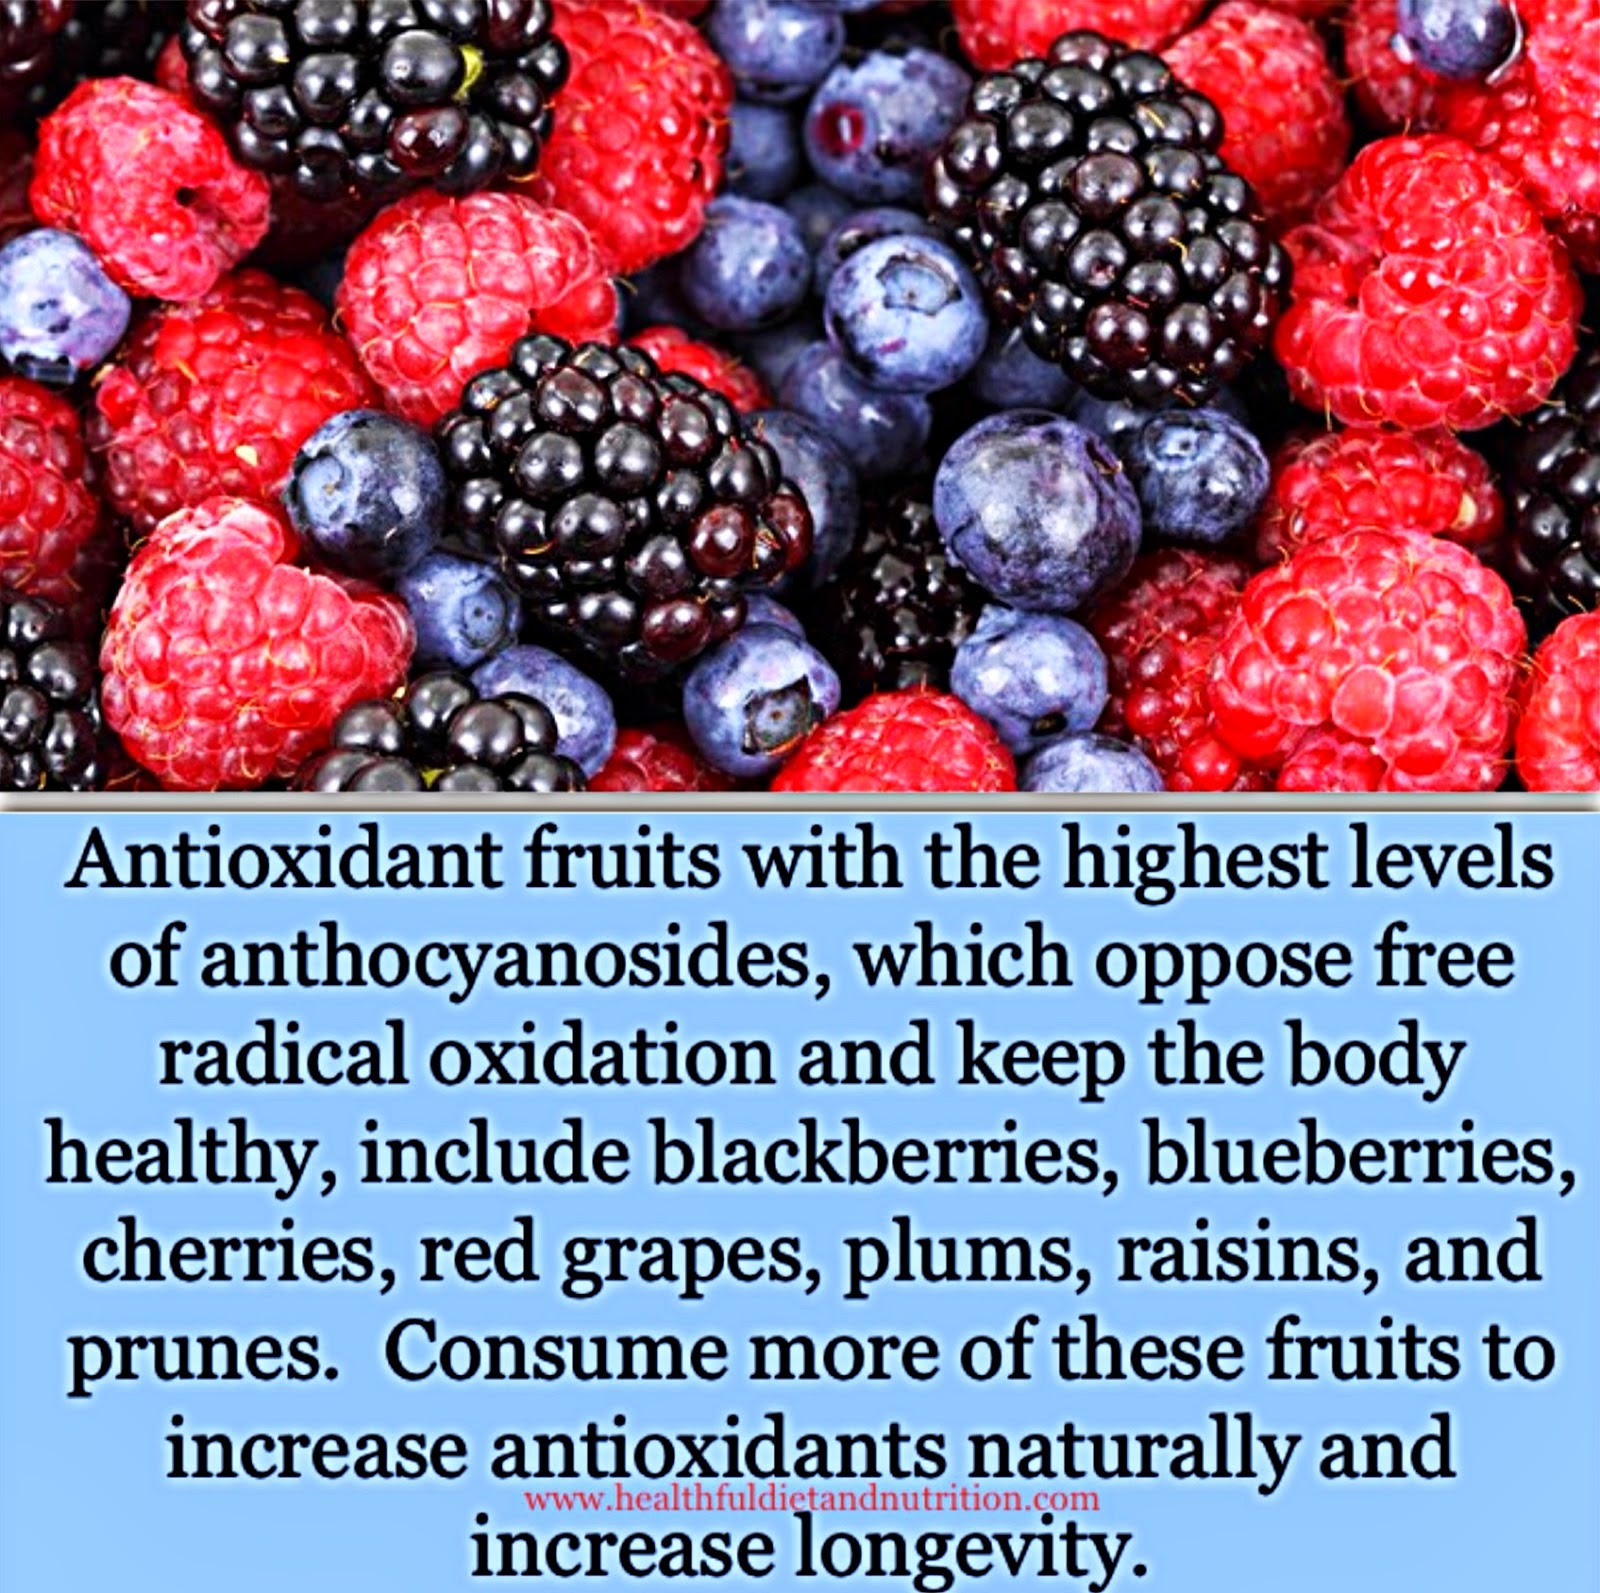 Antioxidant fruits with the highest levels of anthocyanosides, which oppose free radical oxidation and keep the body healthy, include blackberries, blueberries, cherries, red grapes, plums, raisins, and prunes. Consume more of these fruits to increase antioxidants naturally and increase longevity.